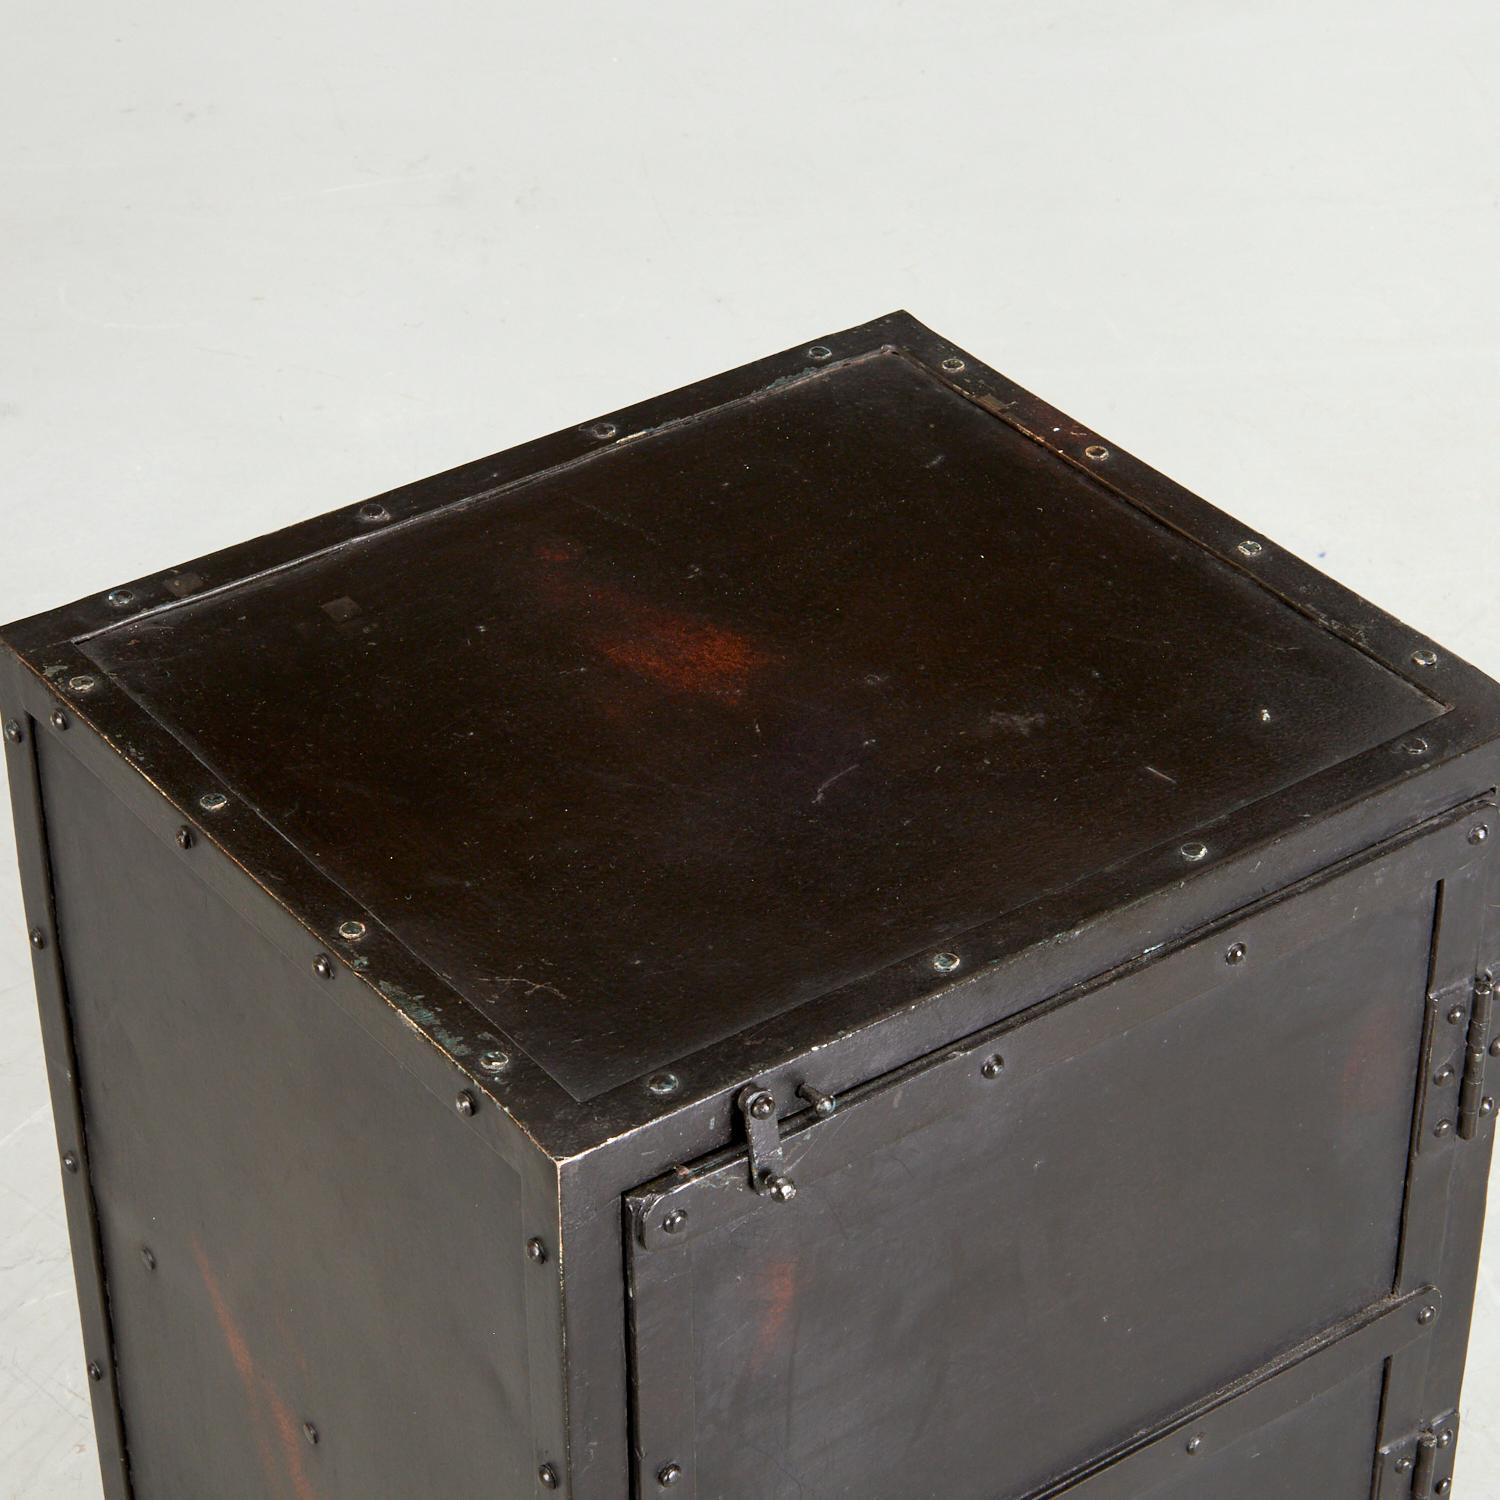 21st c., Butler Owen Industrial Side Cabinet, a single door iron cabinet, with interior shelf, in distressed black finish, unmarked. 

Evocative of a storage locker, this rugged side chest is an inspired addition to any loft space. Forged from iron